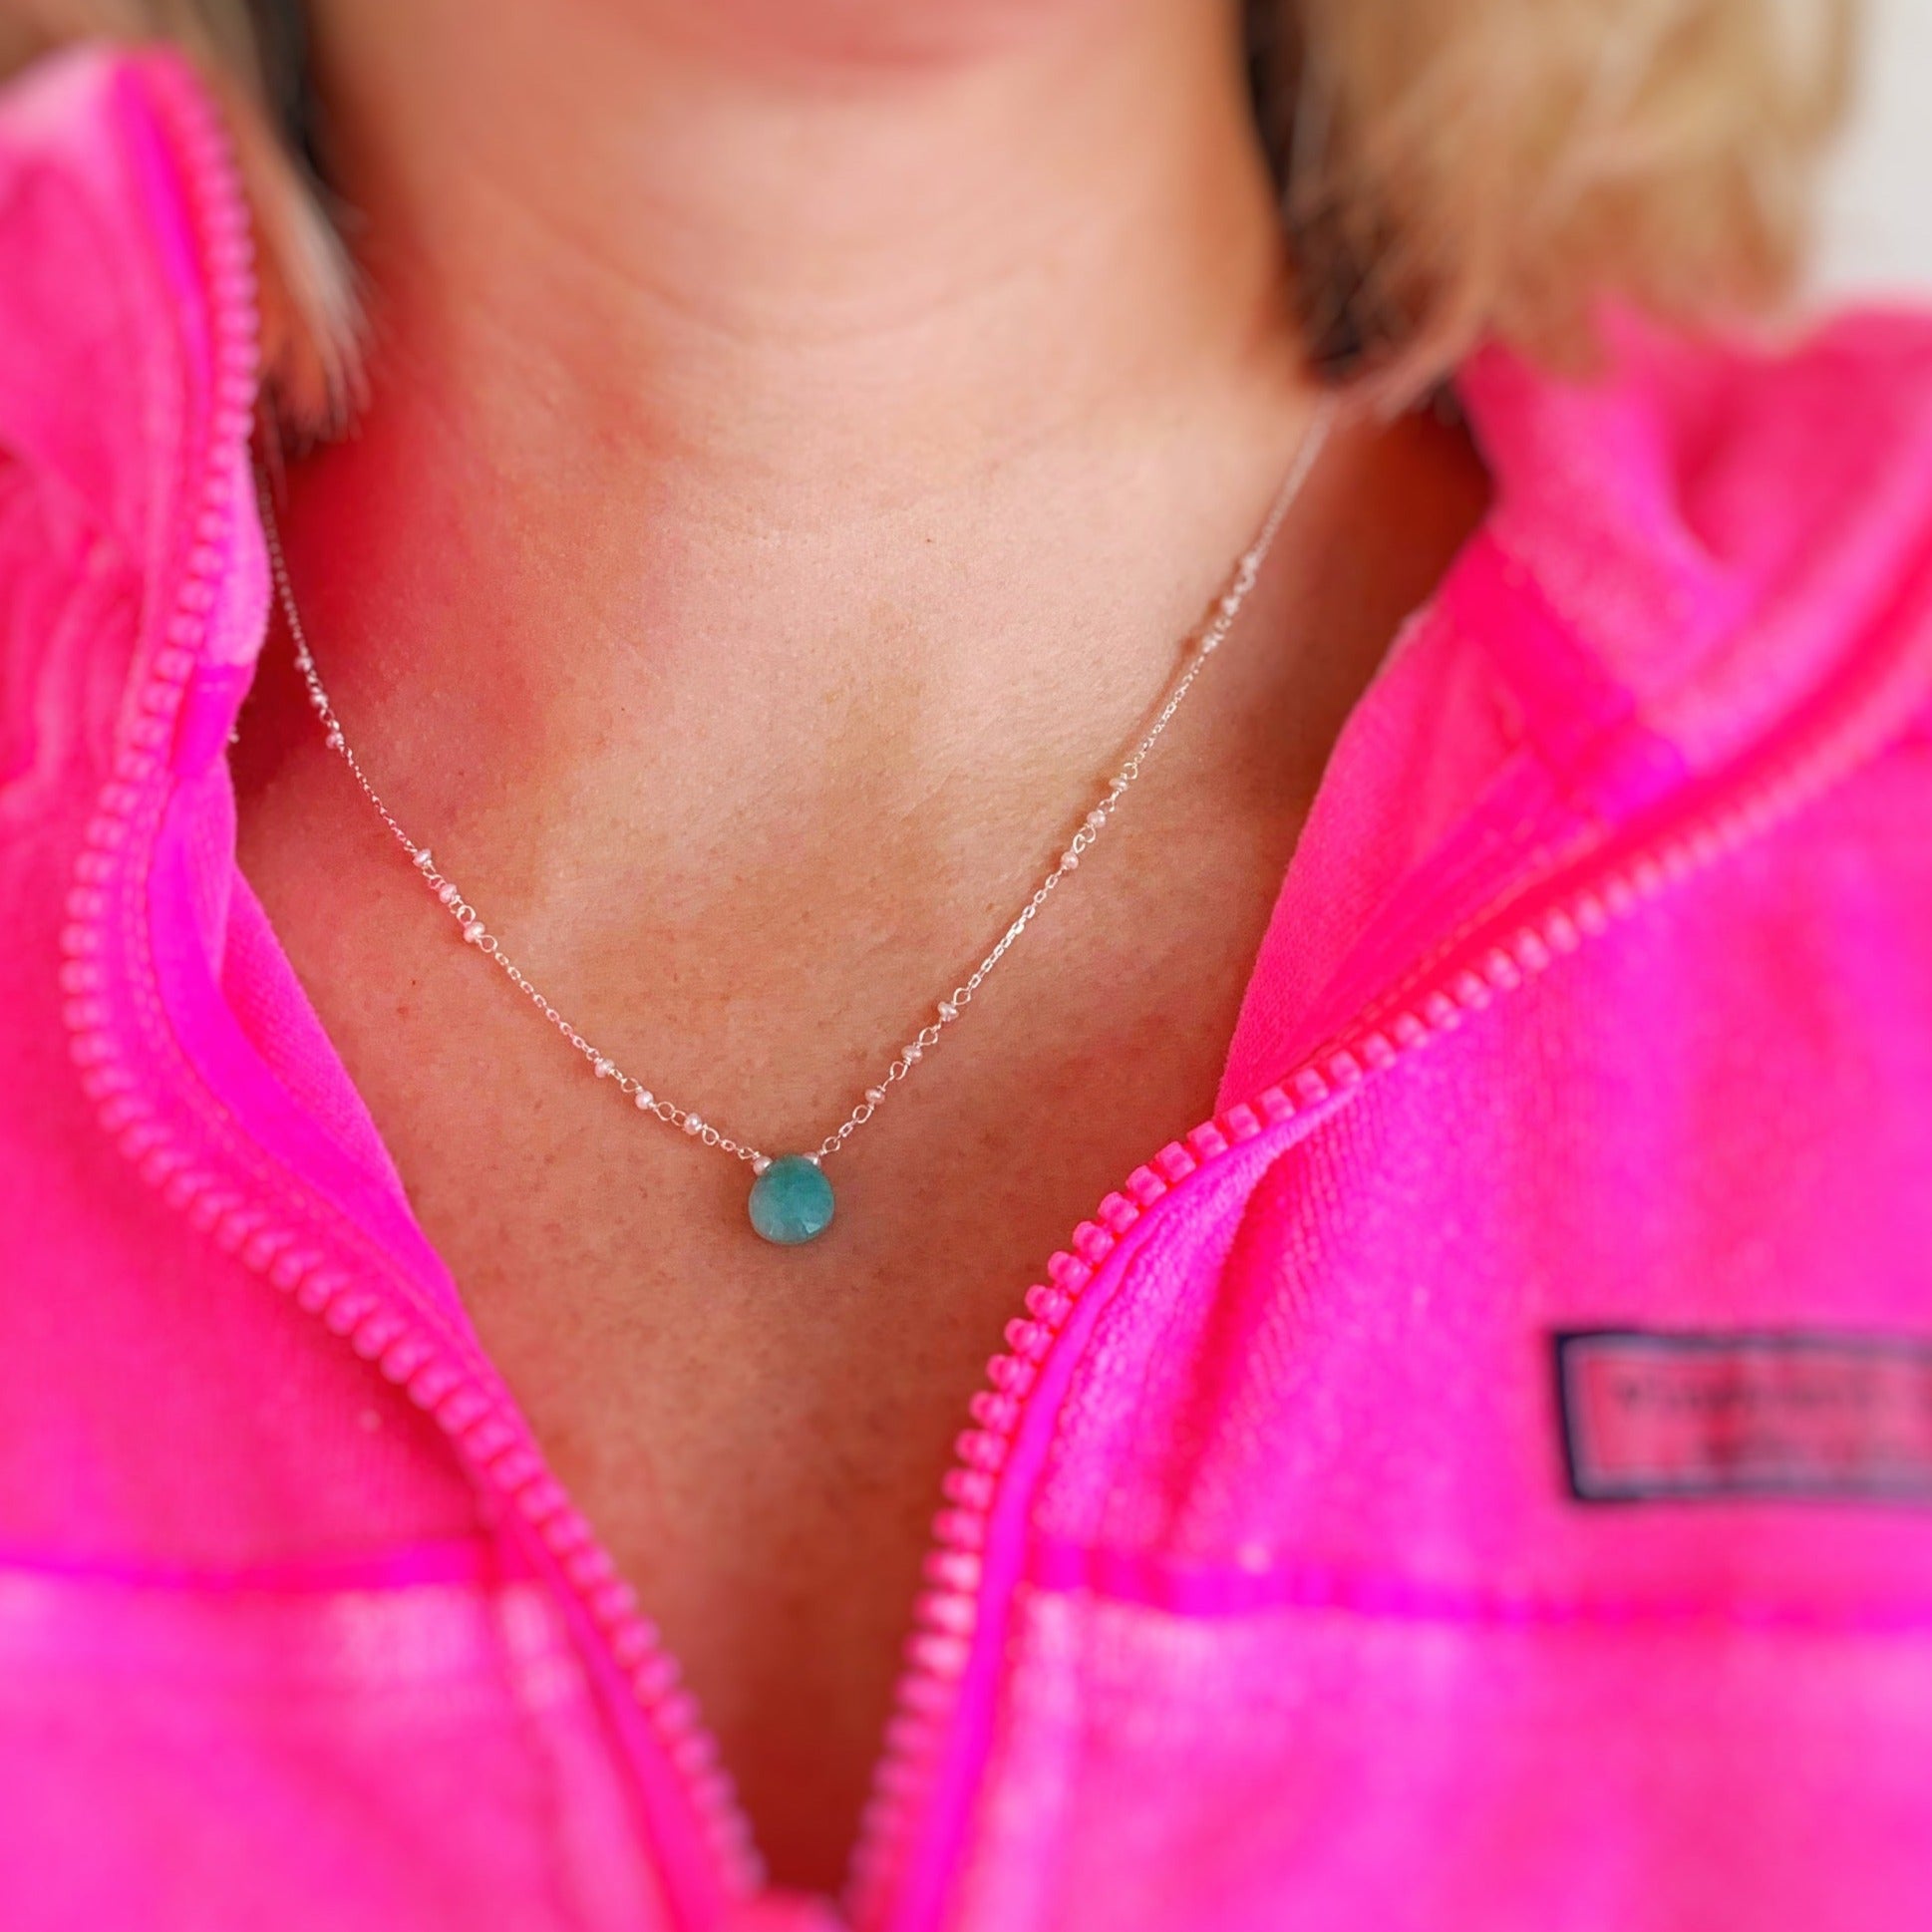 Mermaids and madeleines island air necklace in sterling silver is a necklace with an amazonite drop at the center and sterling chain with freshwater pearls. This is a photograph of a person wearing the necklace for a better idea of size